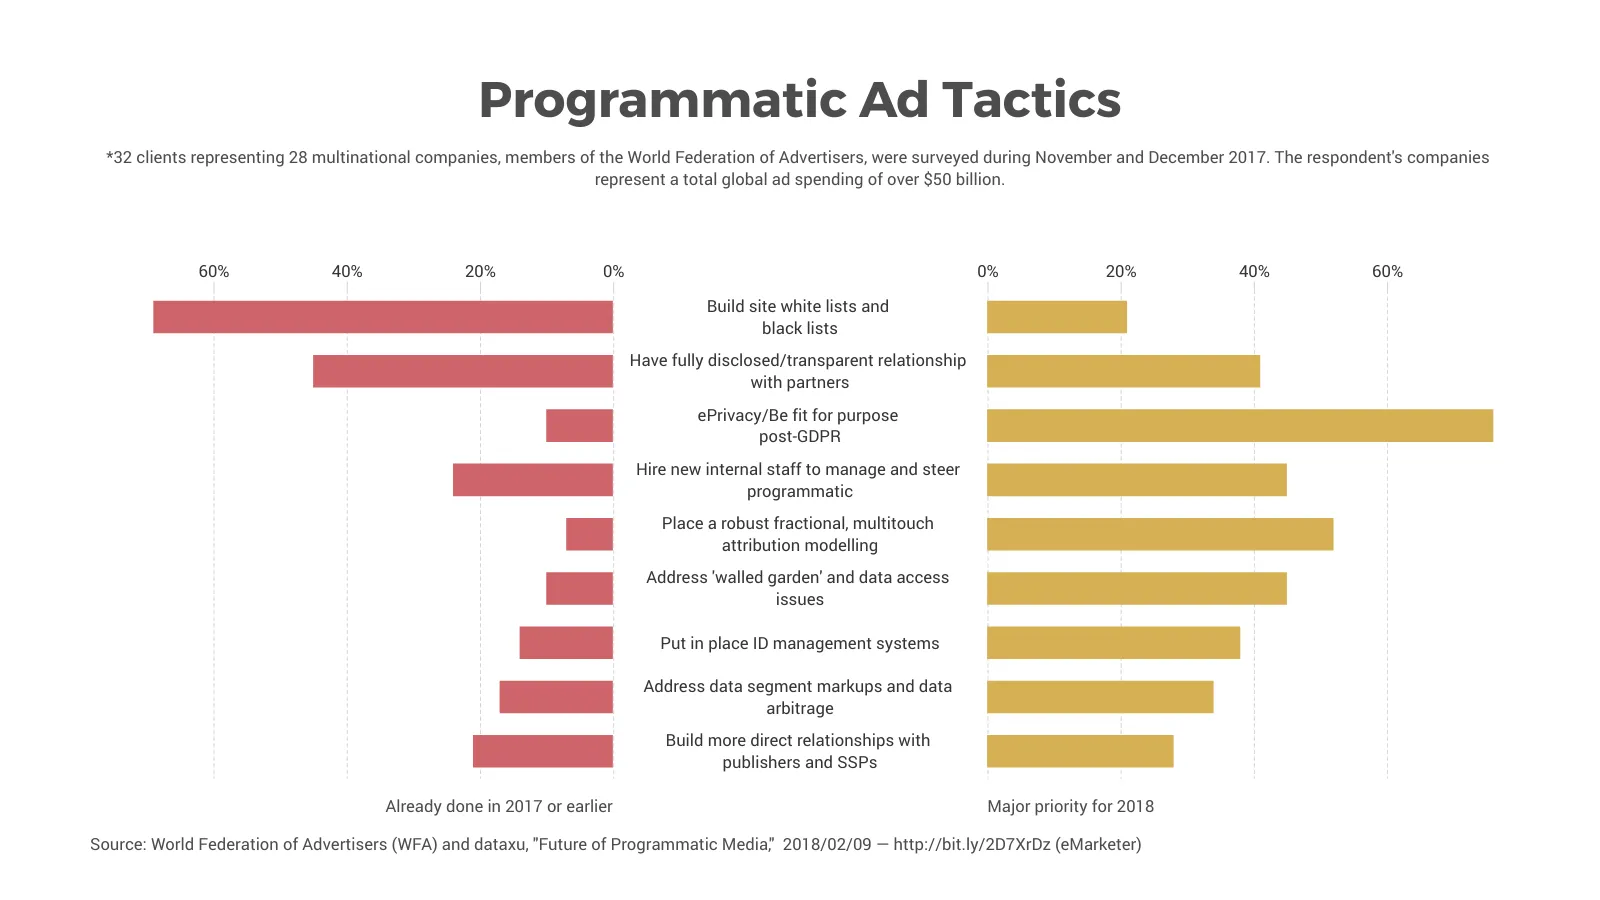 Butterfly Chart example: Programmatic Ad Tactics